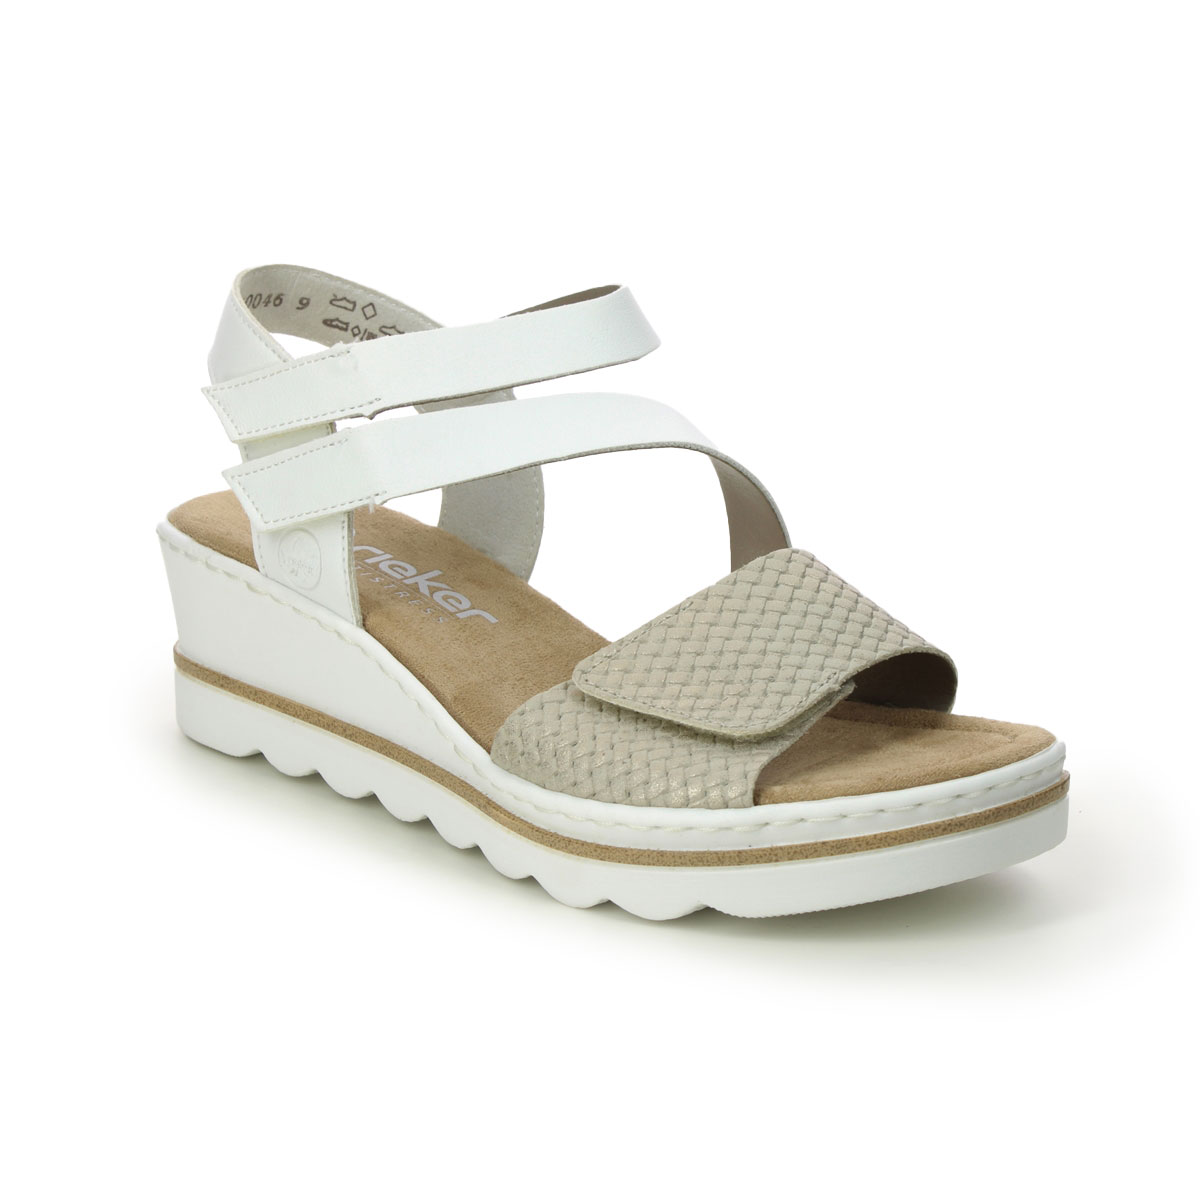 Rieker 67454-80 White Light Gold Womens Wedge Sandals in a Plain Man-made in Size 37